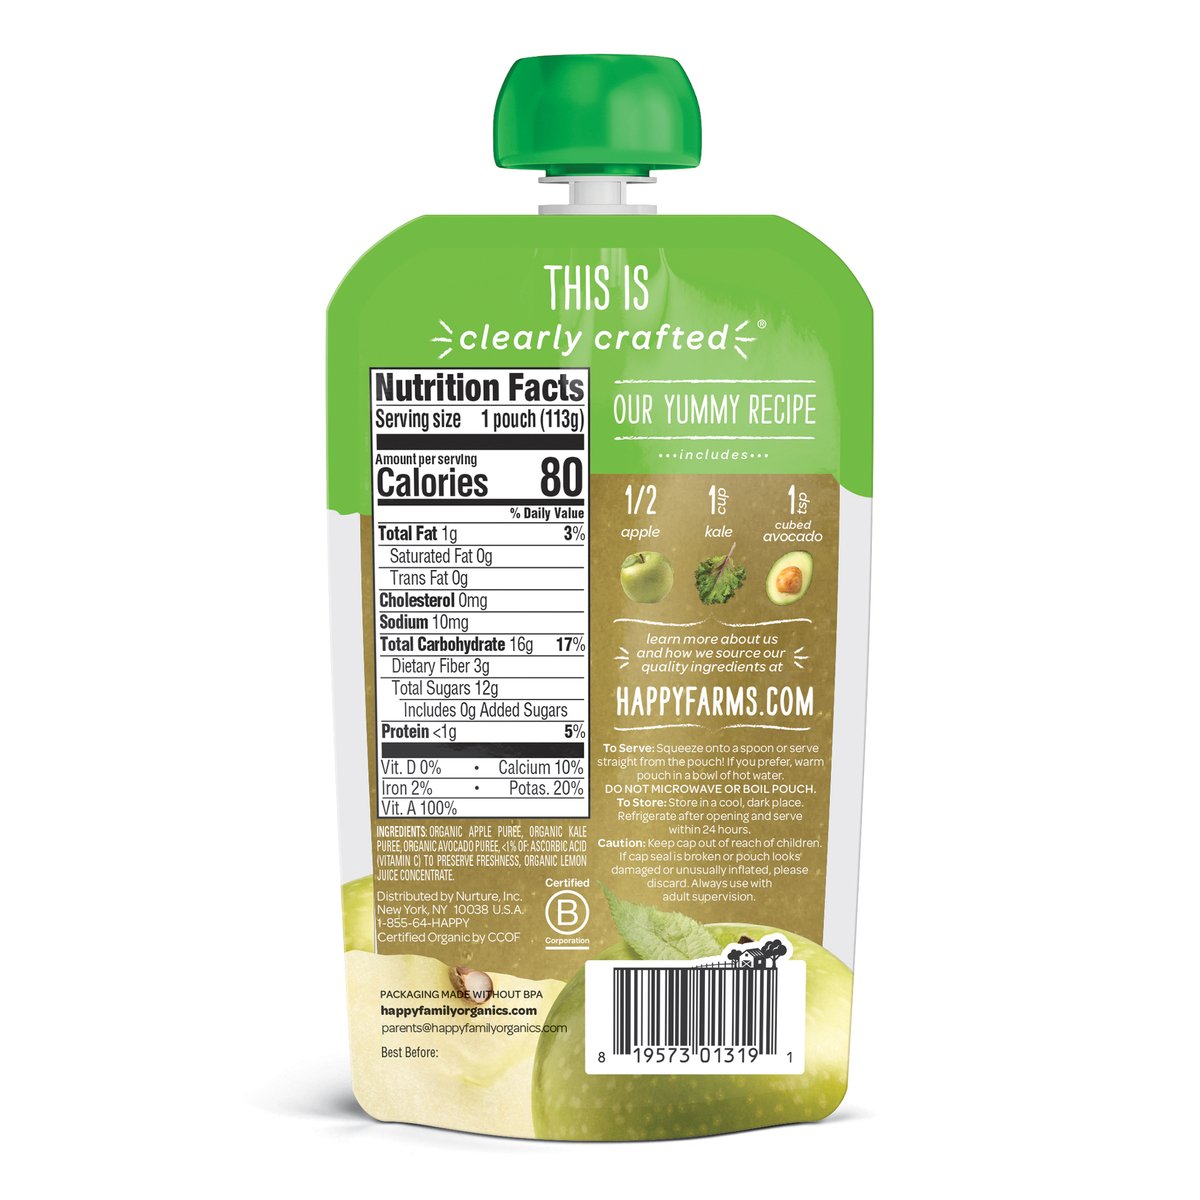 Happy Baby Stage 2 Organics Clearly Crafted Apples, Kale & Avocados Baby Food 113 g